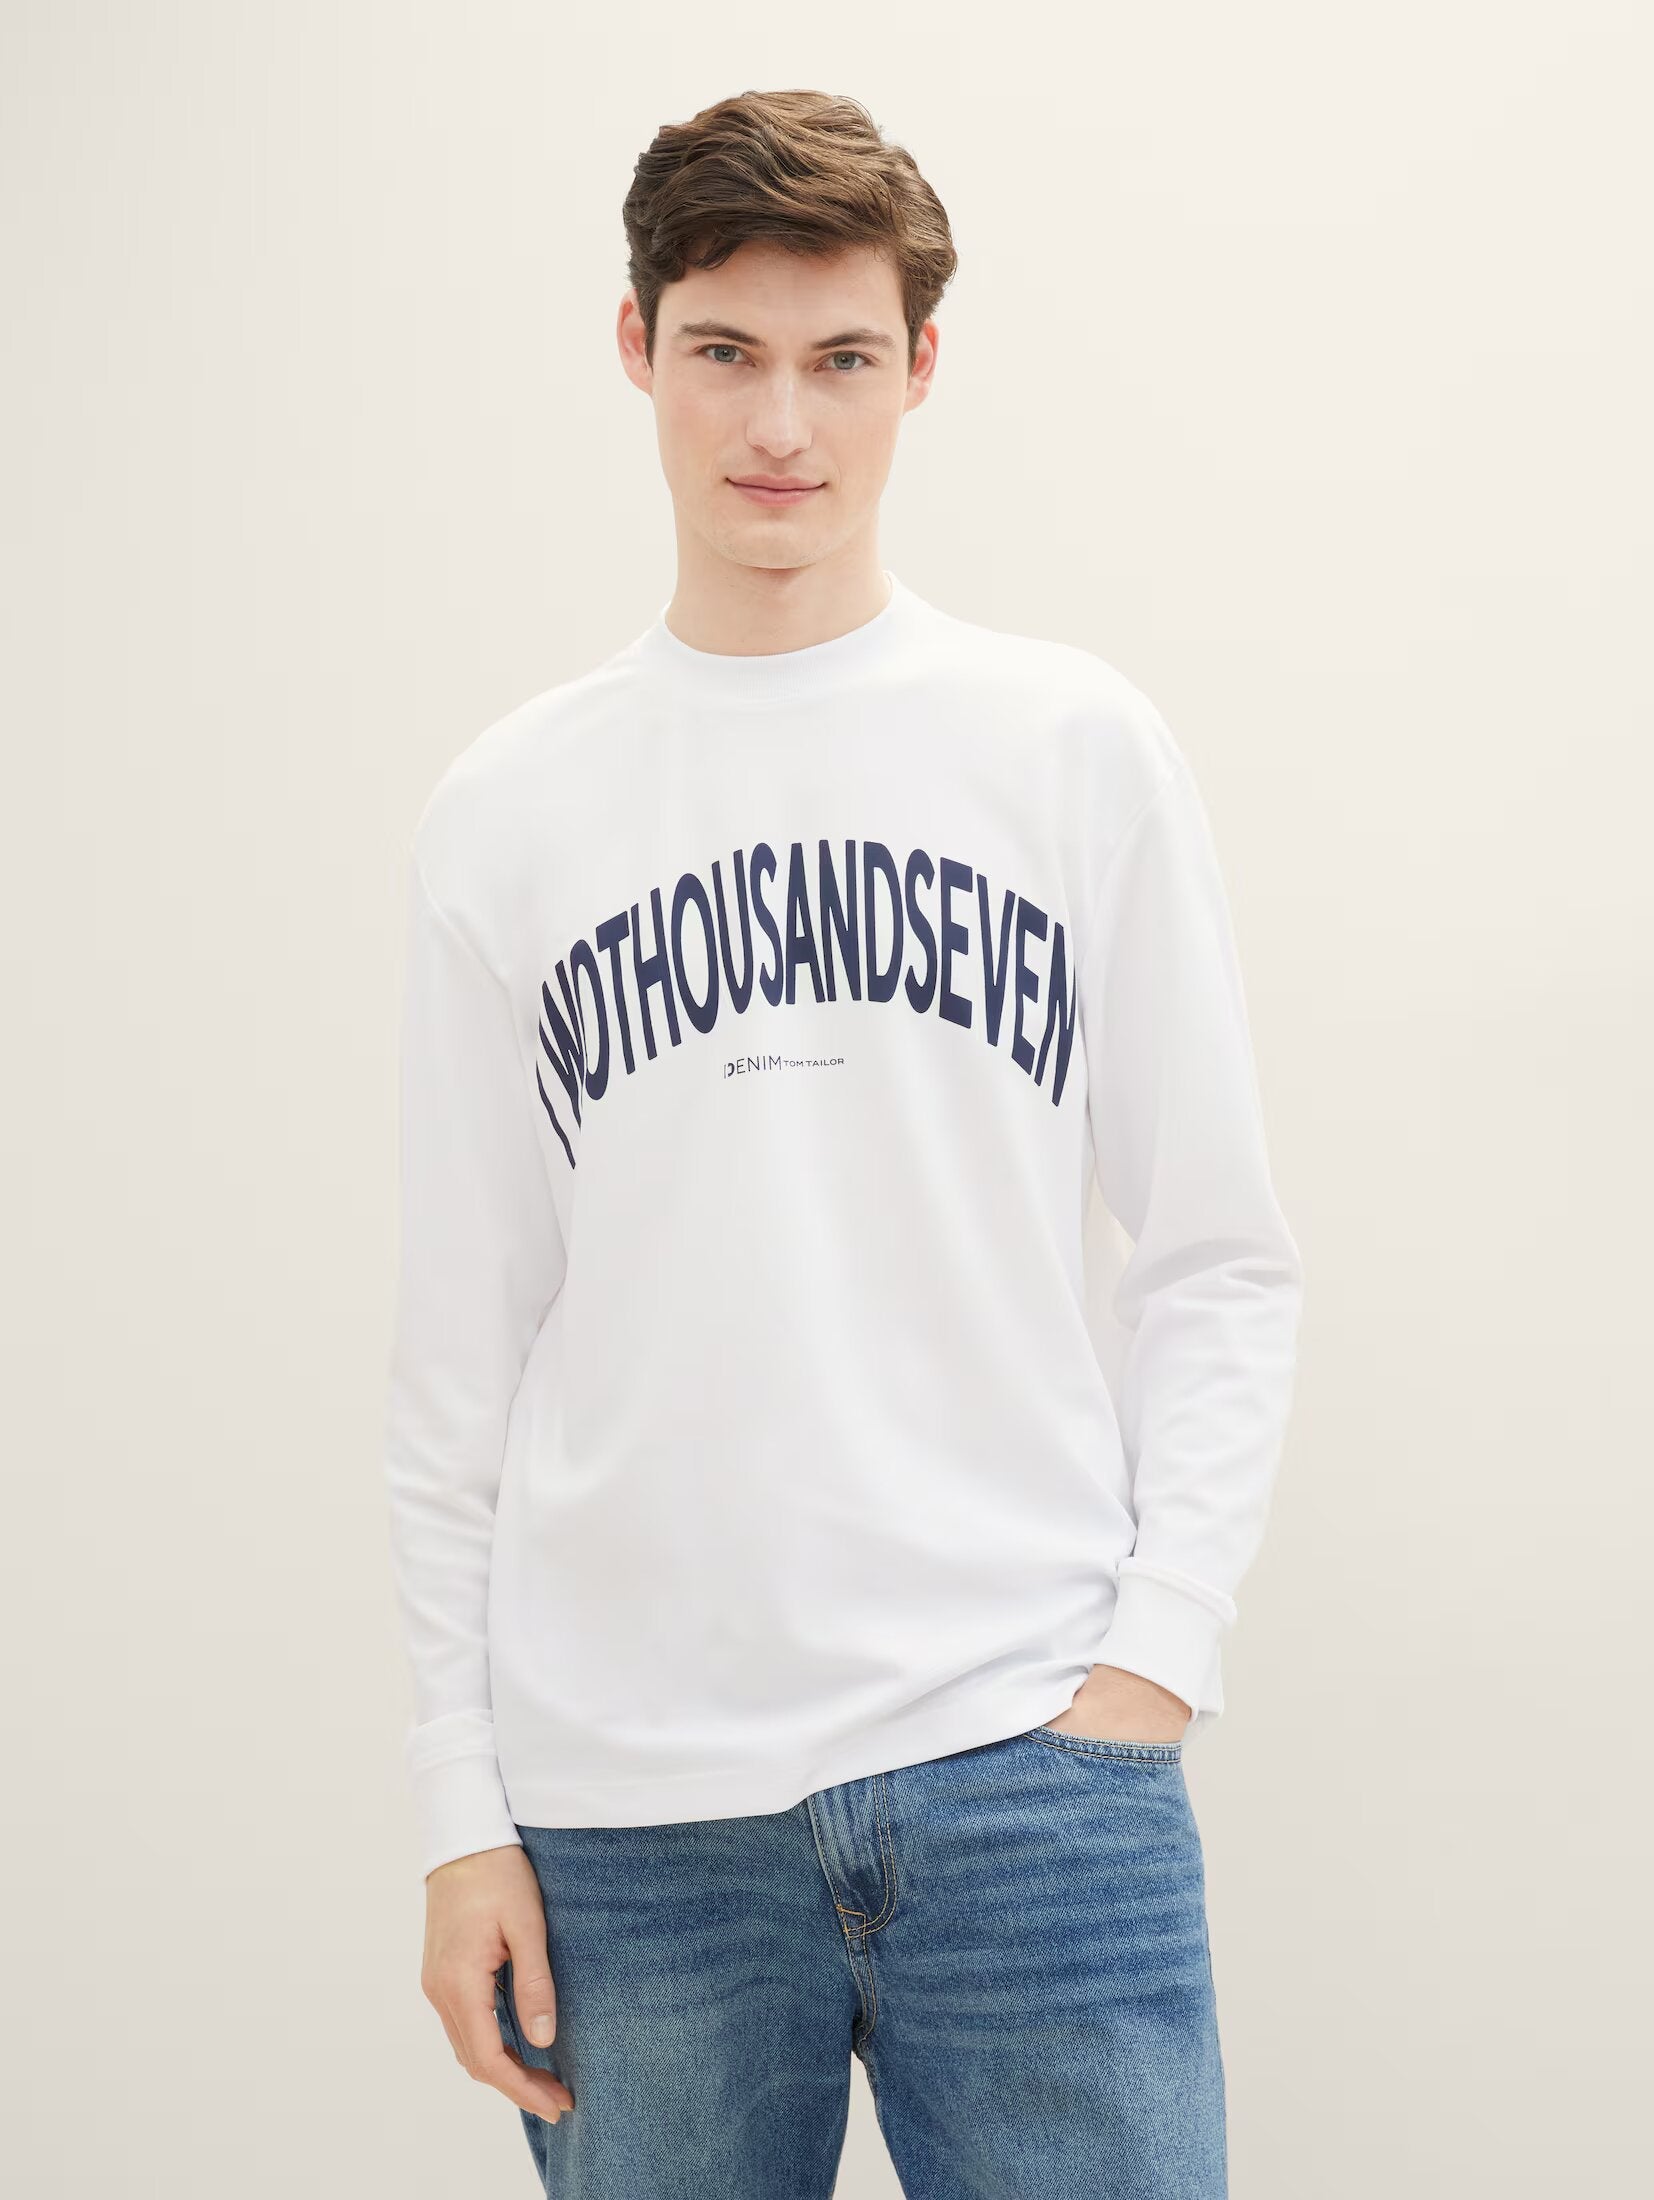 Tom Tailor White Sweatshirt With a Text Print